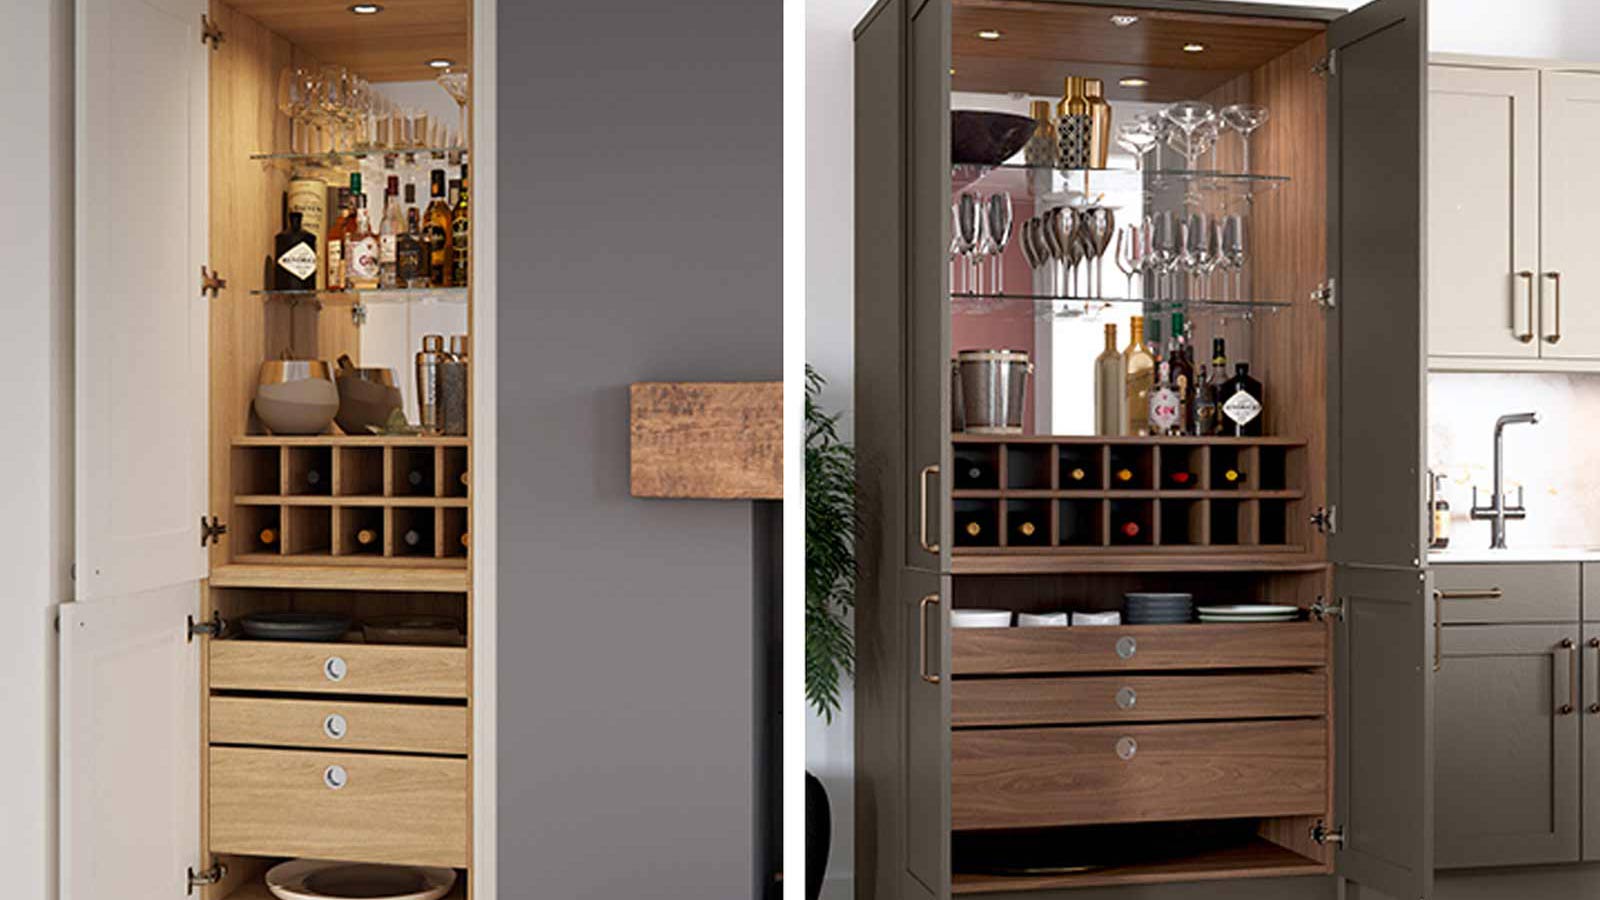 Glass Wine storage cabinets with wine glass shelves for drink storage